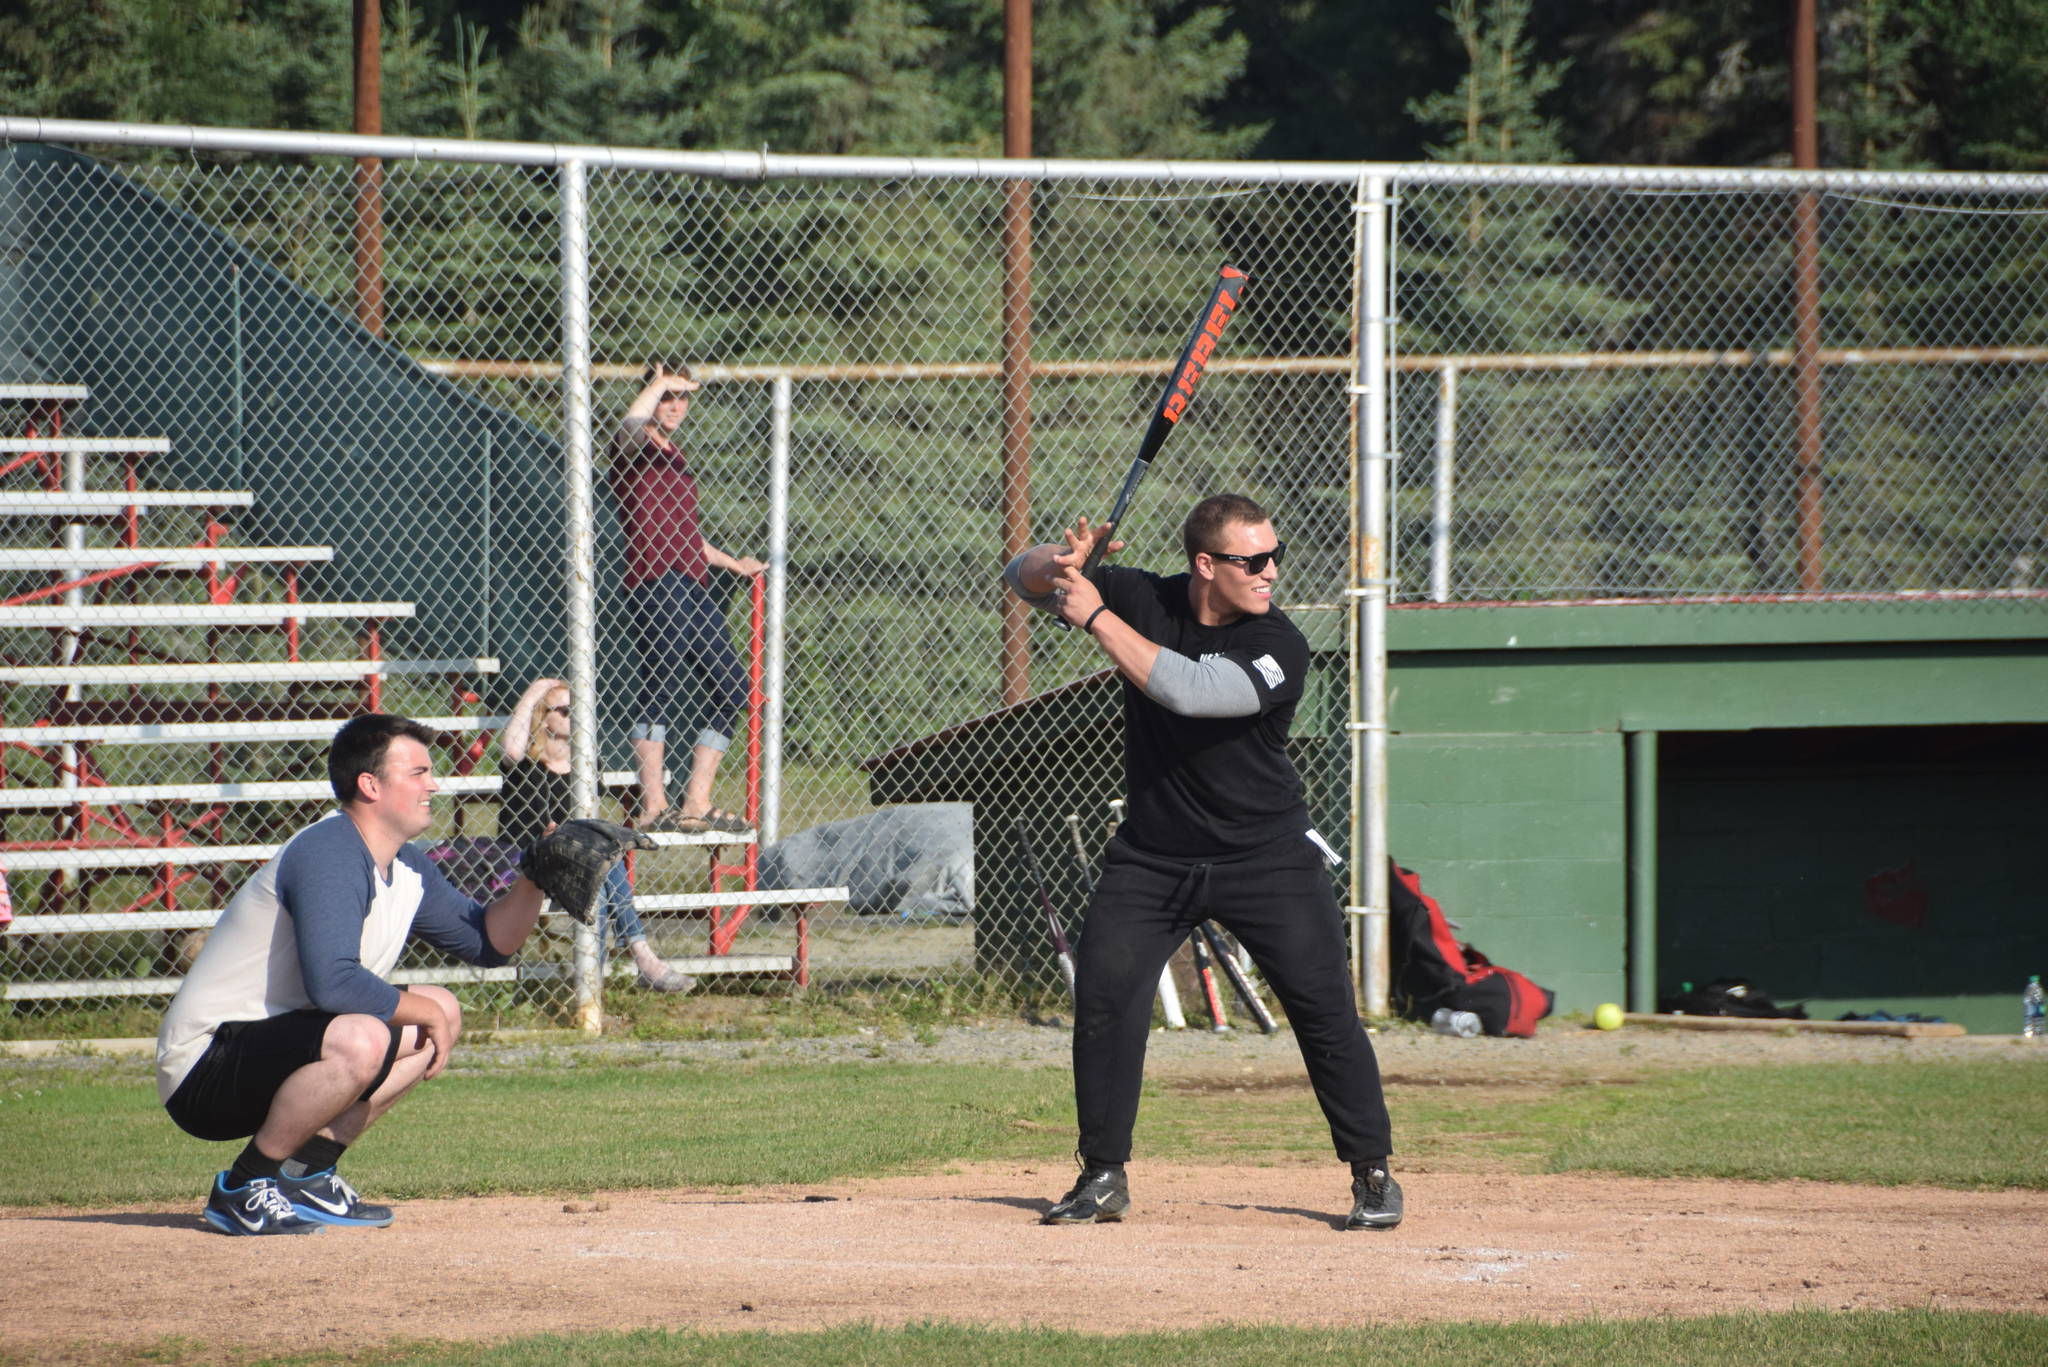 Brian Mazurek / Peninsula Clarion                                Nikiski firefighter Stephen Hartley steps up to the plate during the third annual Guns and Hoses charity baseball game Friday at Coral Seymour Memorial Park in Kenai. Local law enforcement and firefighters went head-to-head Friday night to raise money for the Nikiski Children’s Fund. The firefighters from Nikiski and Kenai put up a valiant effort, but the boys in blue ultimately won the game 6-5. Bailey Epperheimer, executive director for the Nikiski Children’s Fund, said that they were able to raise over $1,800 on Friday night, the most amount of money raised by the nonprofit from a single event.